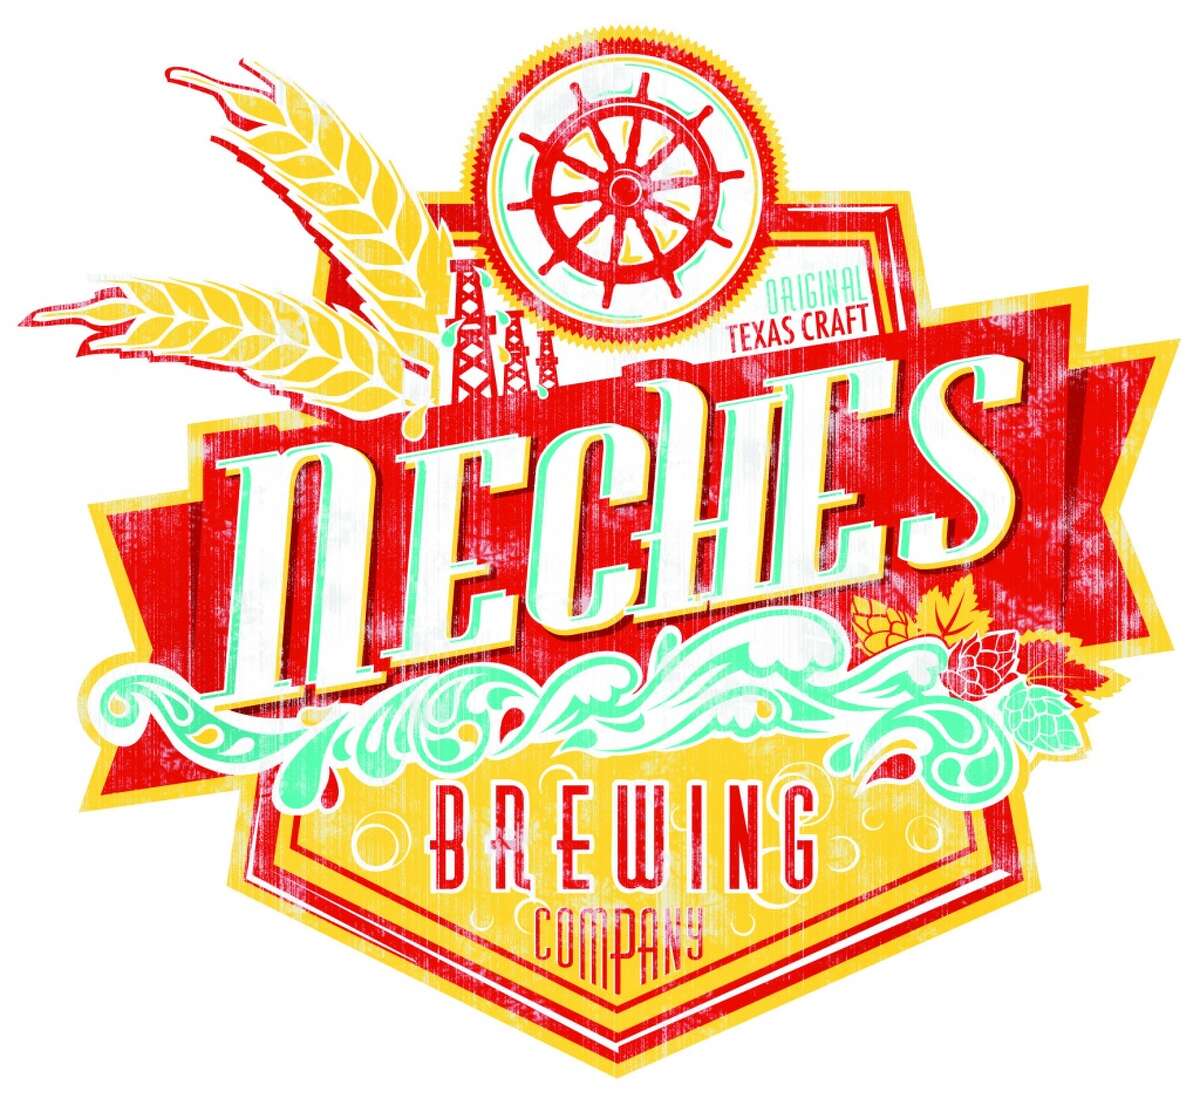 Lance LaRue's logo work for the forthcoming Neches Brewing Company